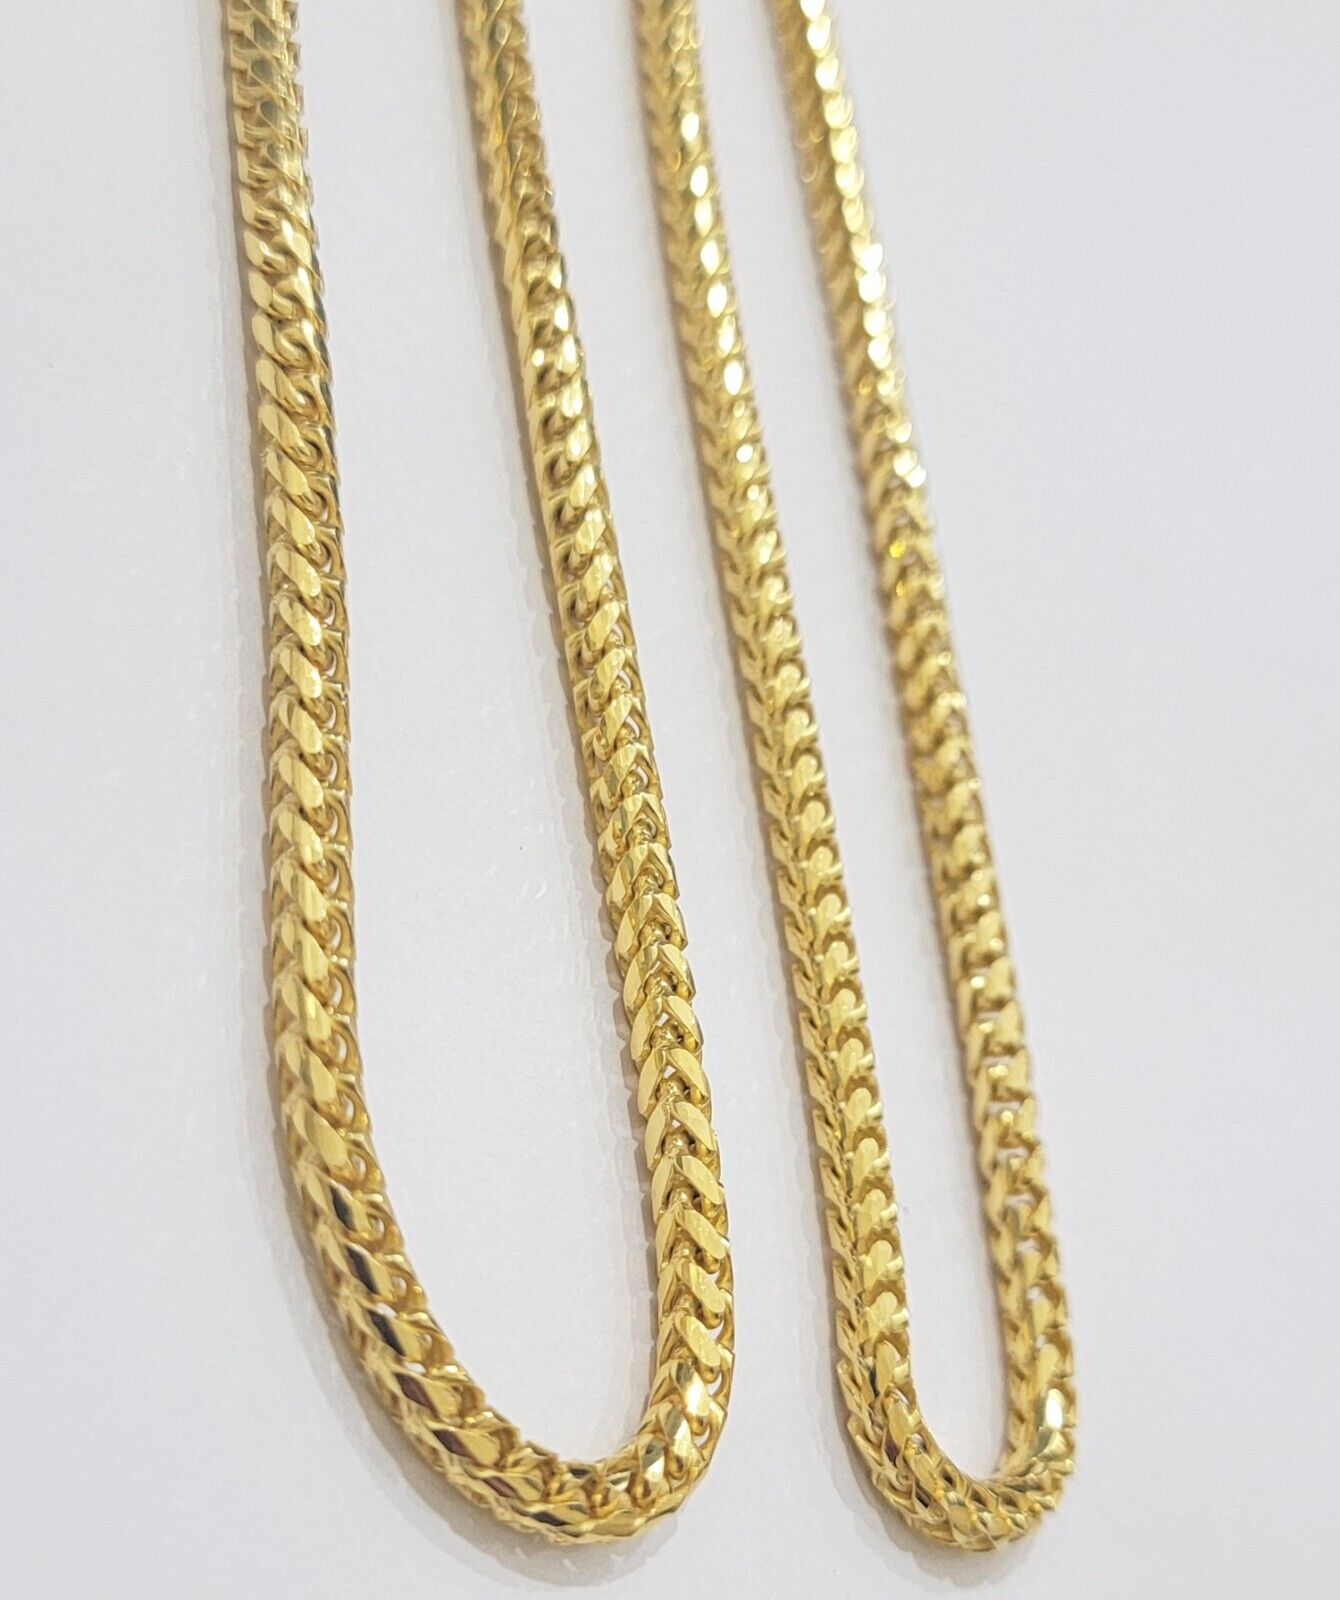 Real 10k Gold Necklace Franco Chain 4mm 26Inch Diamond Cut 10k Yellow Gold SOLID